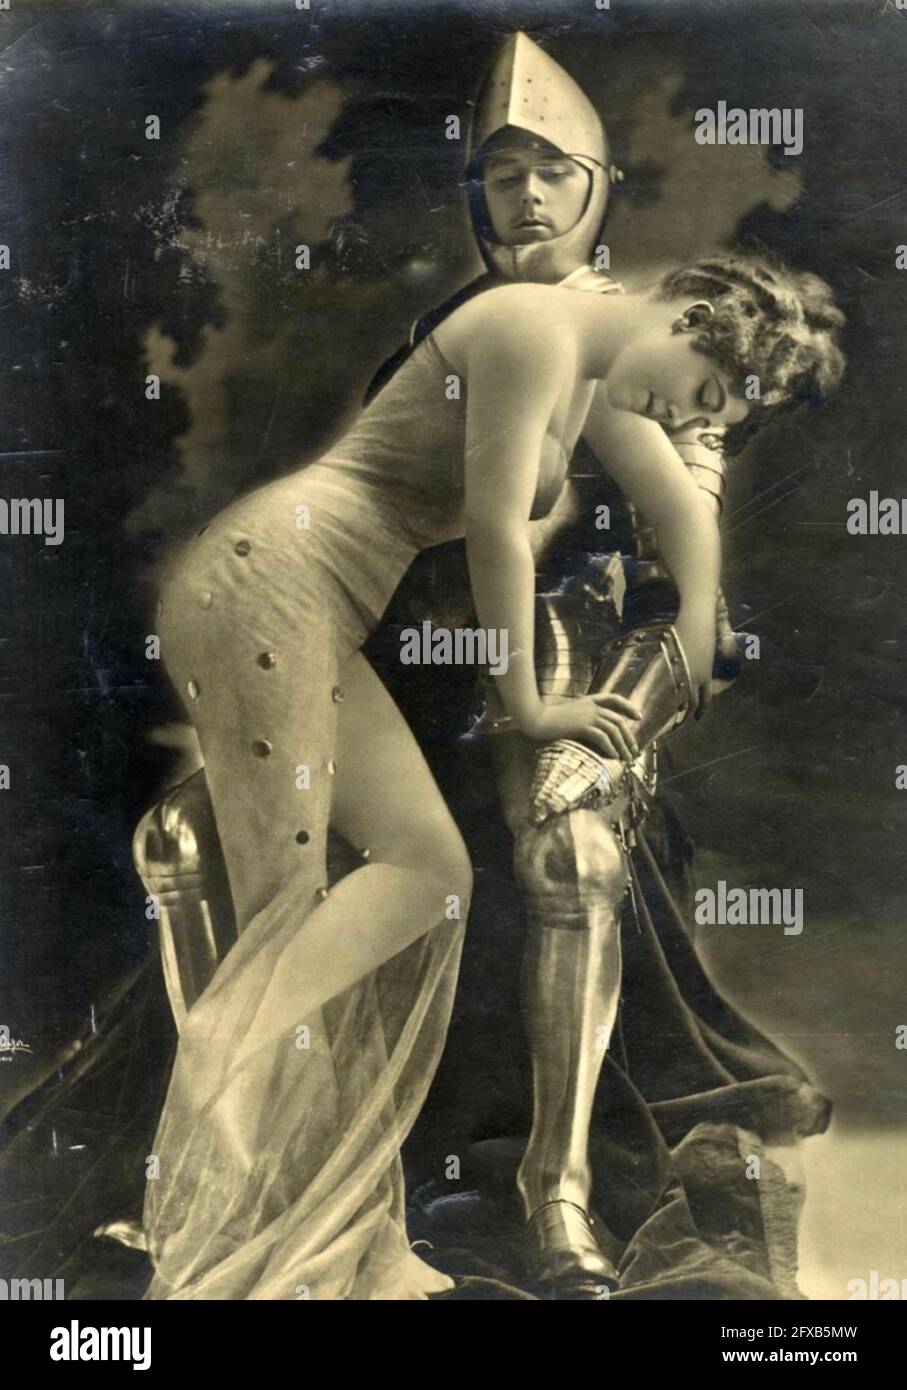 Léopold-Émile Reutlinger vintage photograph of a knight in shining armour and a damsel in distress she is not. Stock Photo